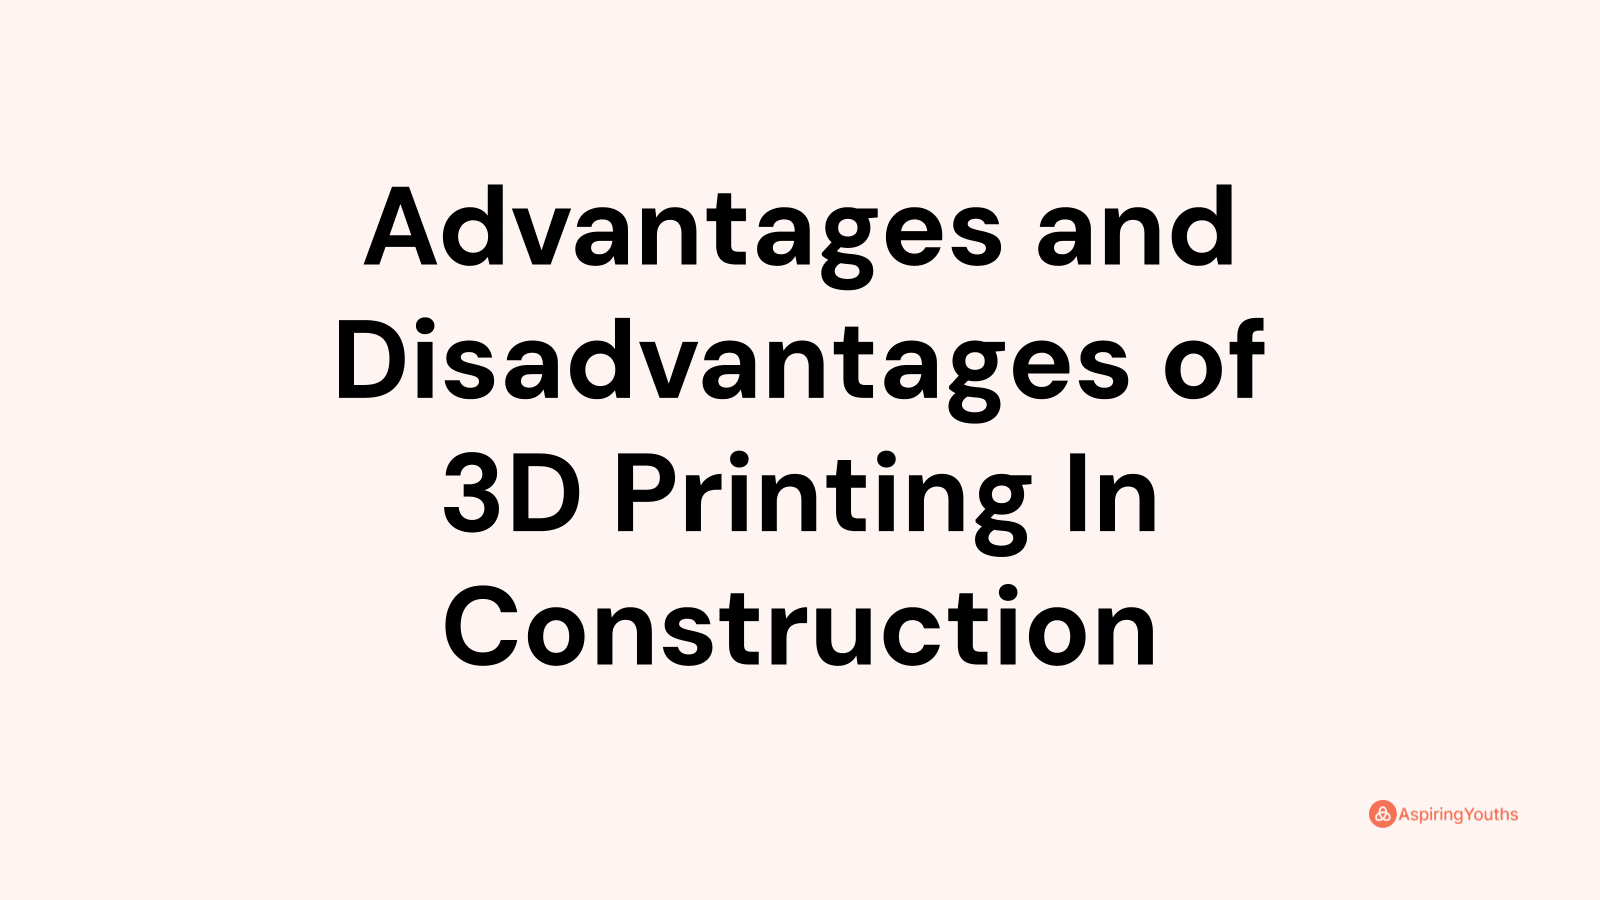 Advantages and disadvantages of 3D Printing In Construction